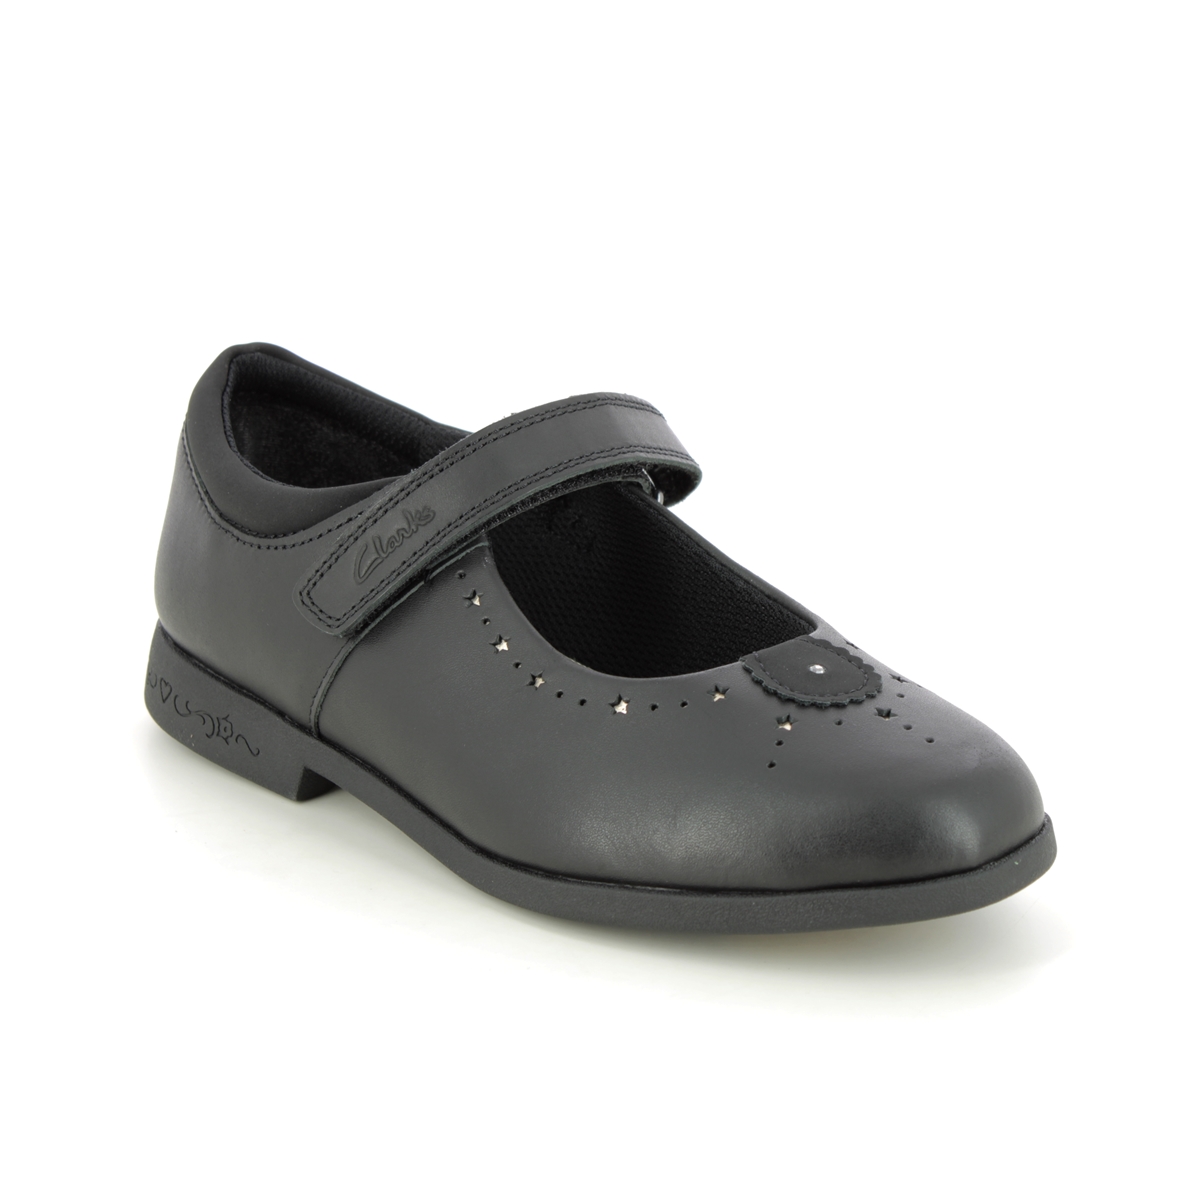 Clarks Magic Step Mj O Black leather Kids girls school shoes 6970-56F in a Plain Leather in Size 3